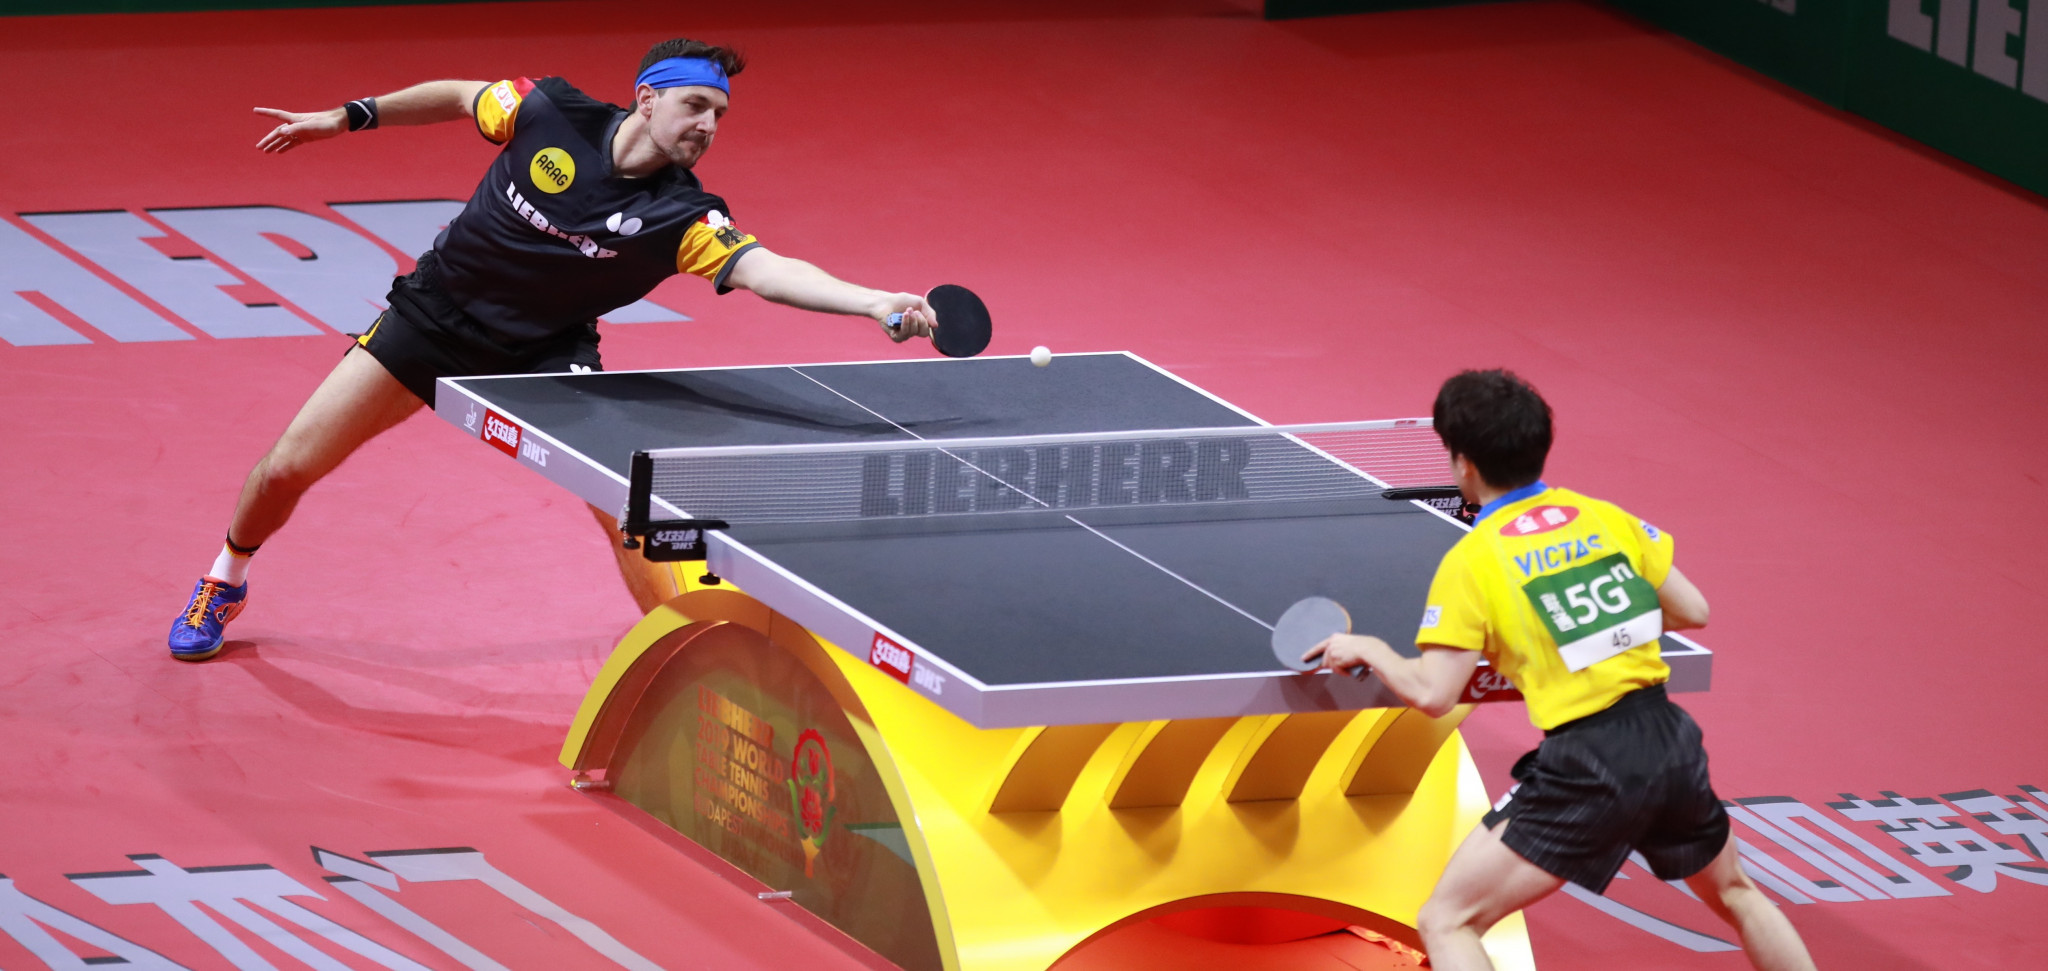 Liebherr named as brand partner of upcoming World Table Tennis Championships